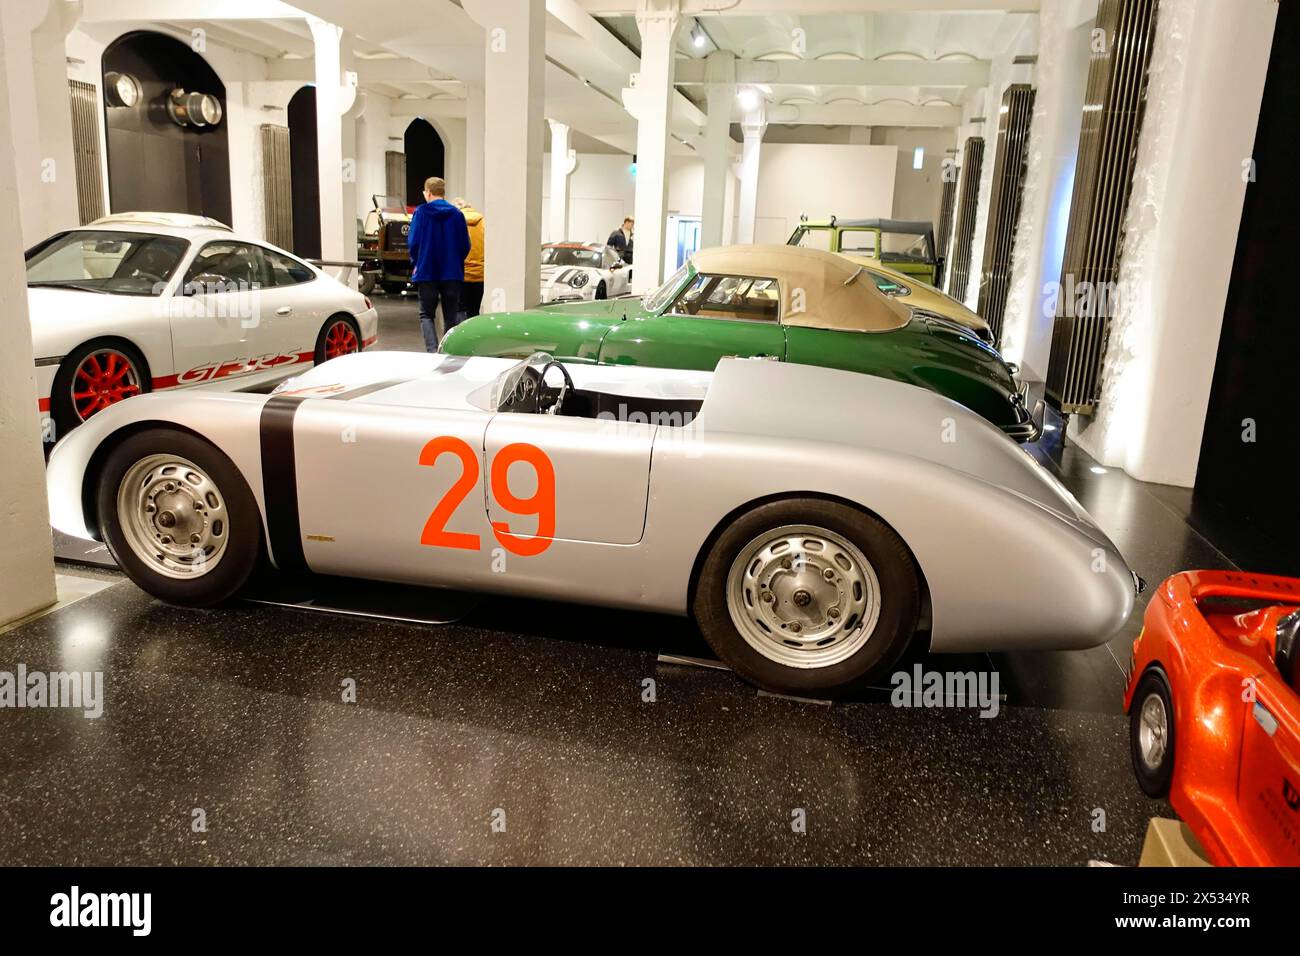 Retro racing car in white and green with the number 29 in a showroom, AUTOMUSEUM PROTOTYP, Hamburg, Hanseatic City of Hamburg, Germany Europe Stock Photo